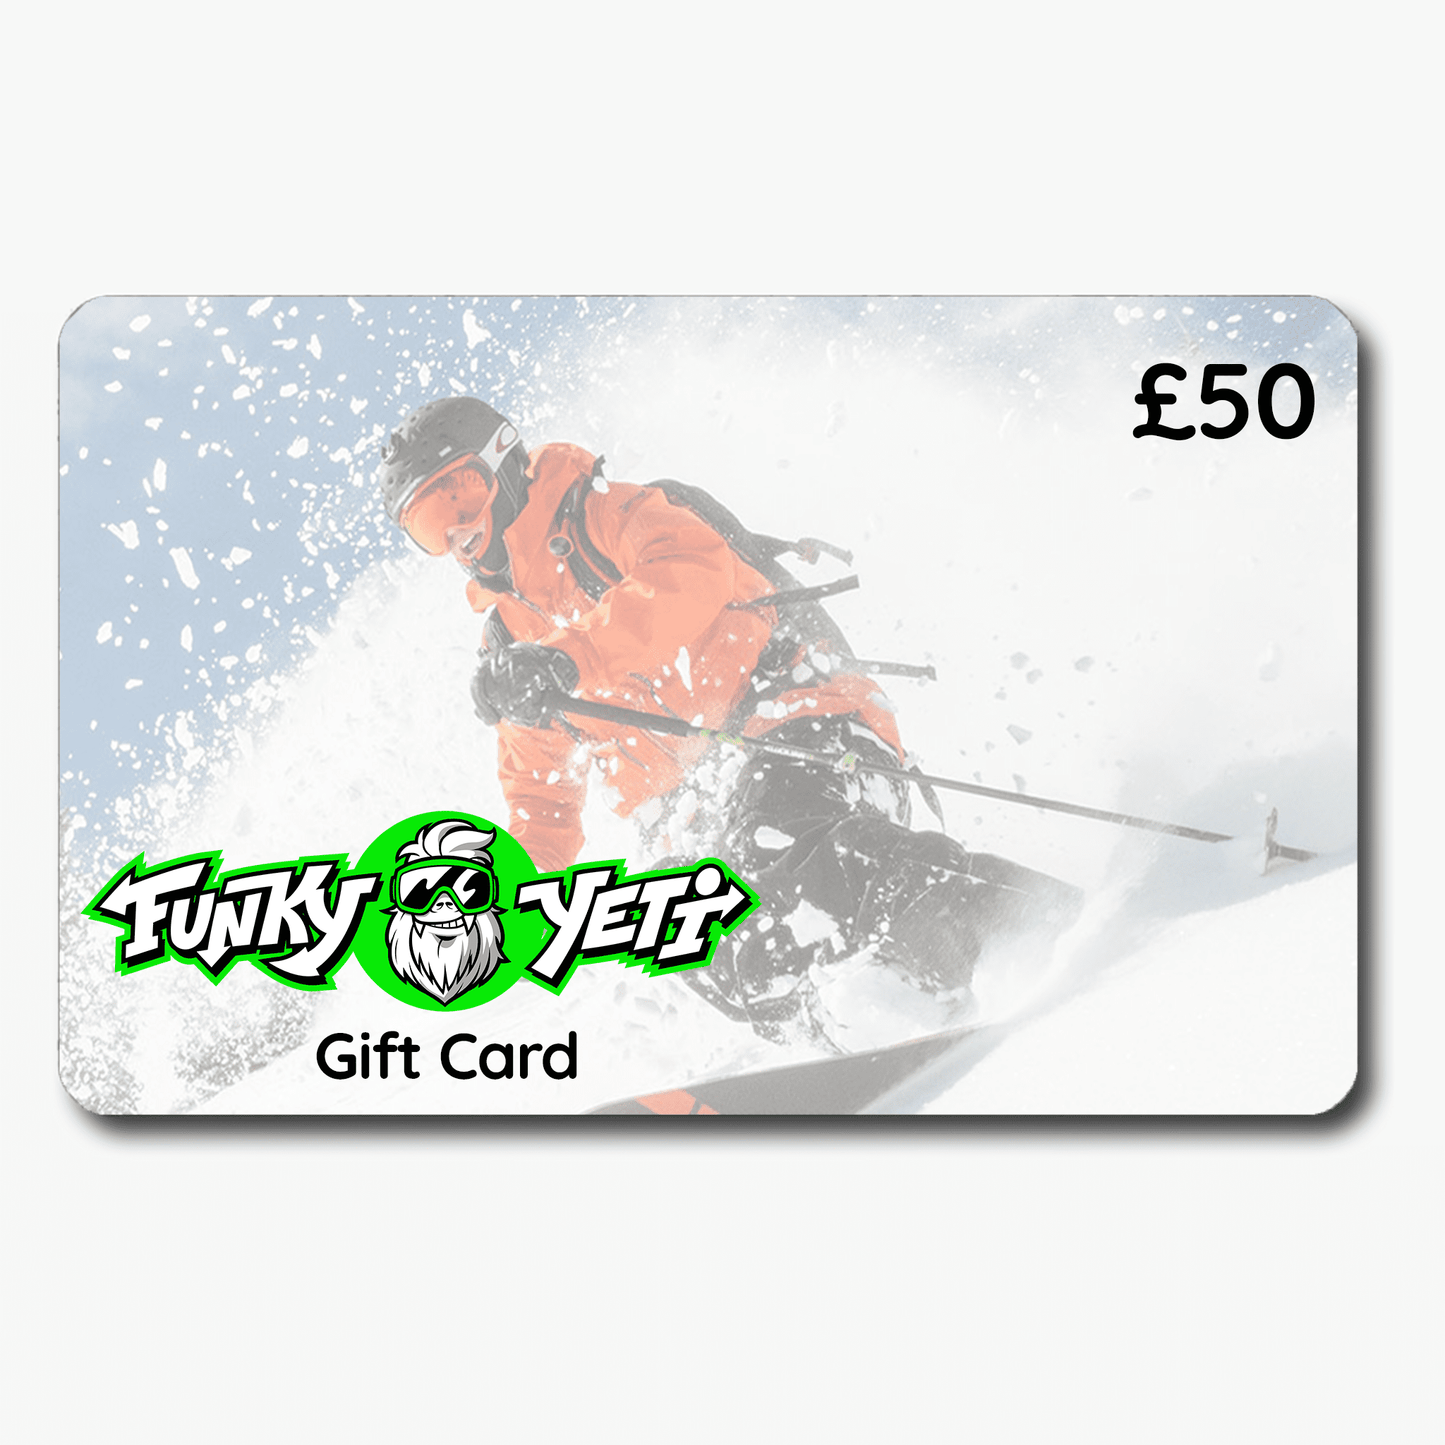 Gift Card - Skiers